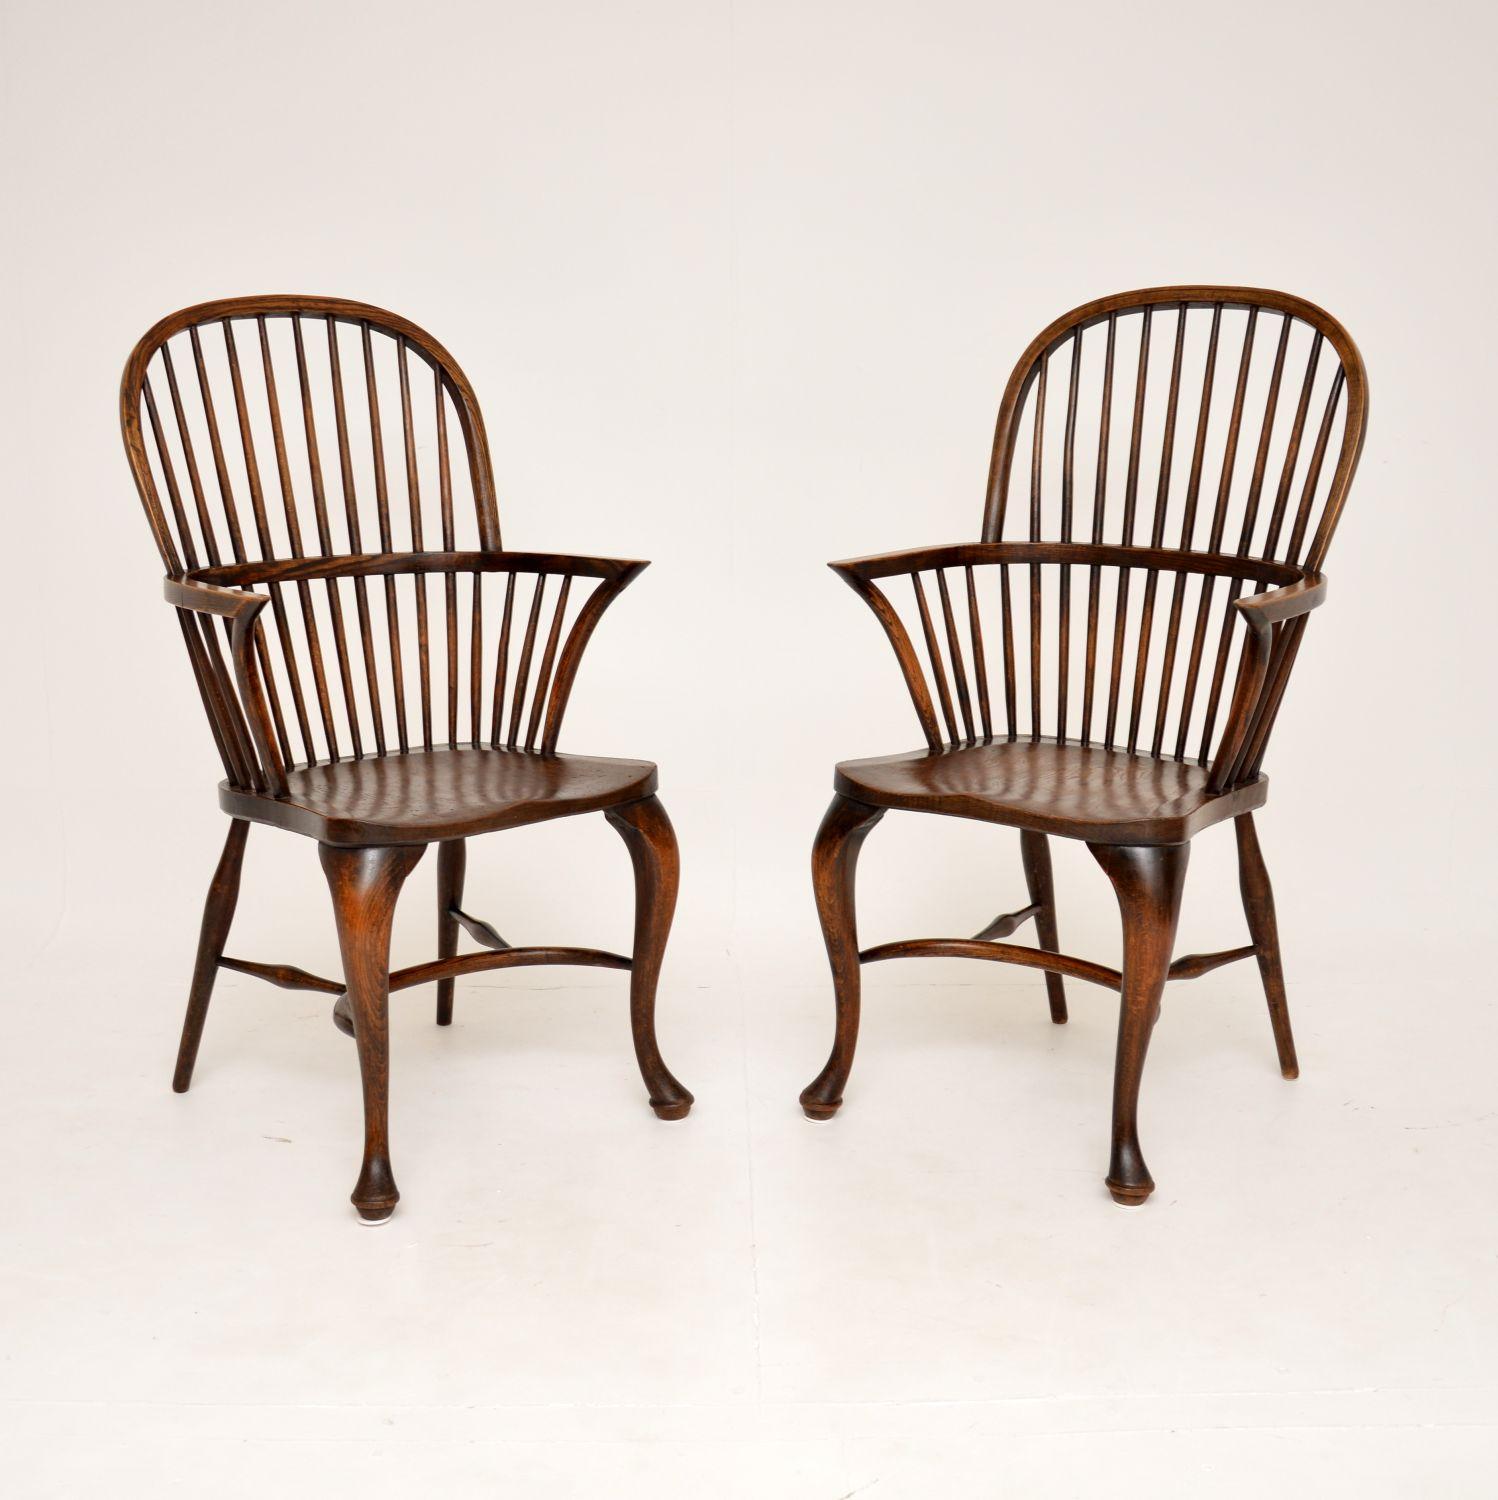 A lovely pair of original period solid elm & oak Windsor armchairs. They were made in England, and I would date them from around the 1850’s period. However – I’m no expert on country furniture, so they could be older.

The quality is amazing, with